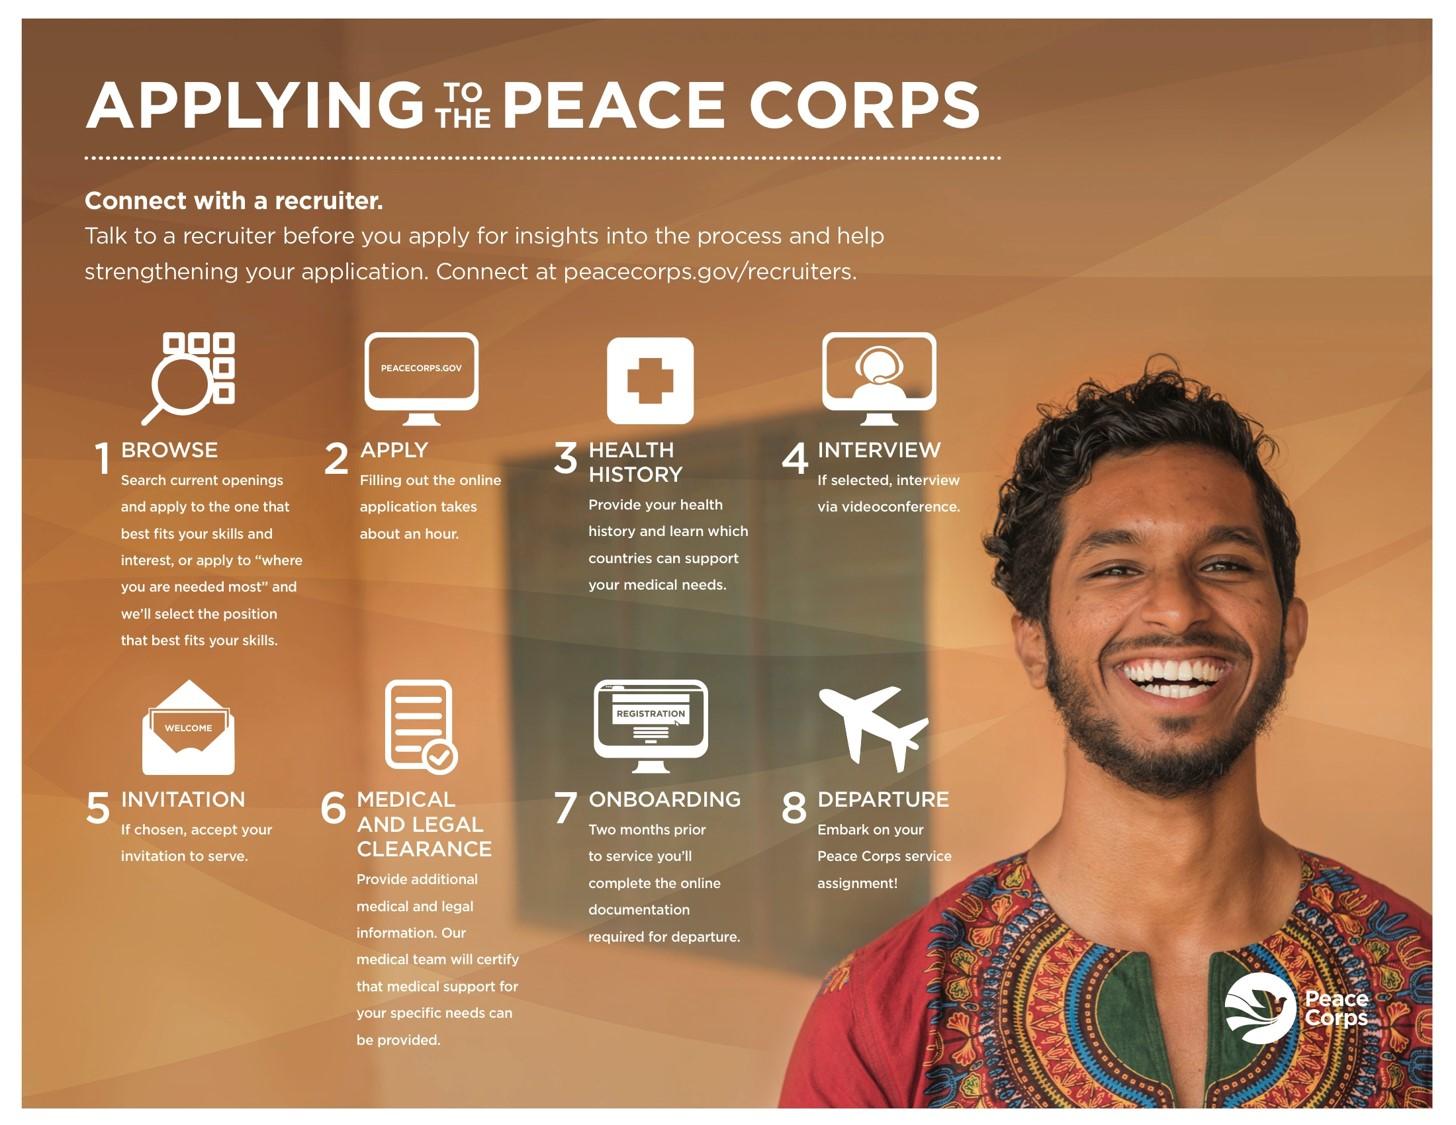 Steps to apply to the peace corps